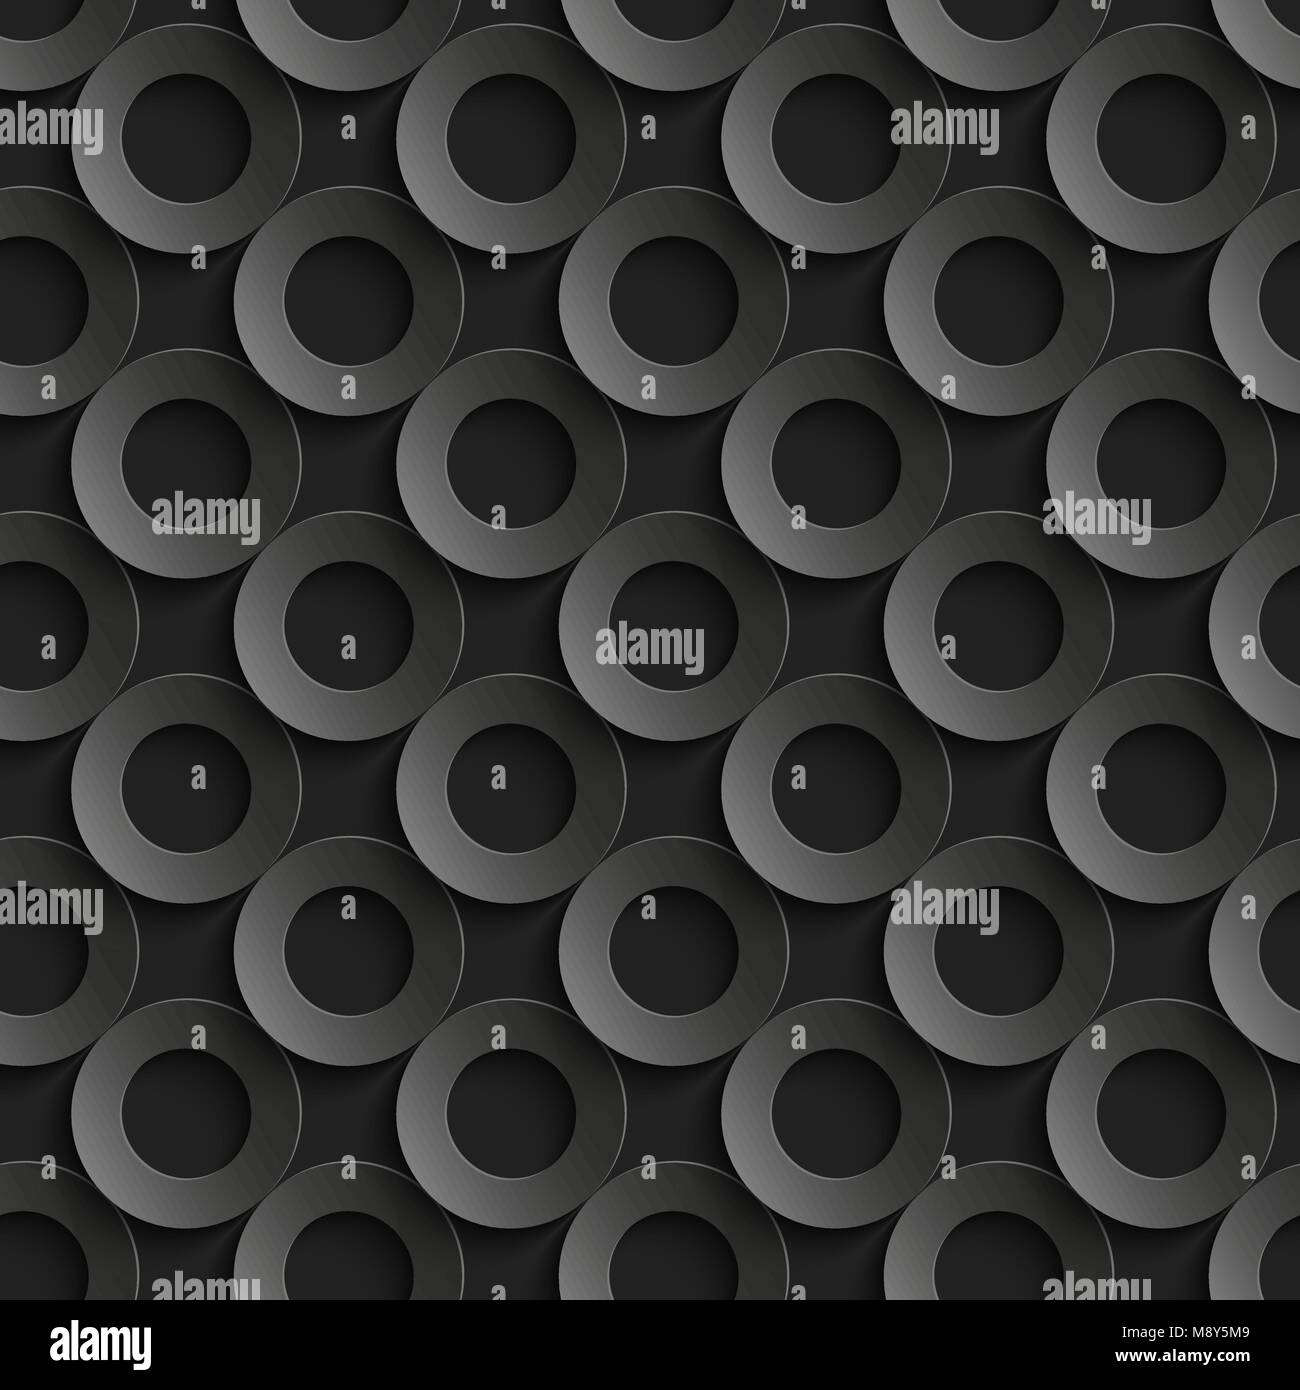 Seamless pattern with paper cut 3D black circles Stock Vector